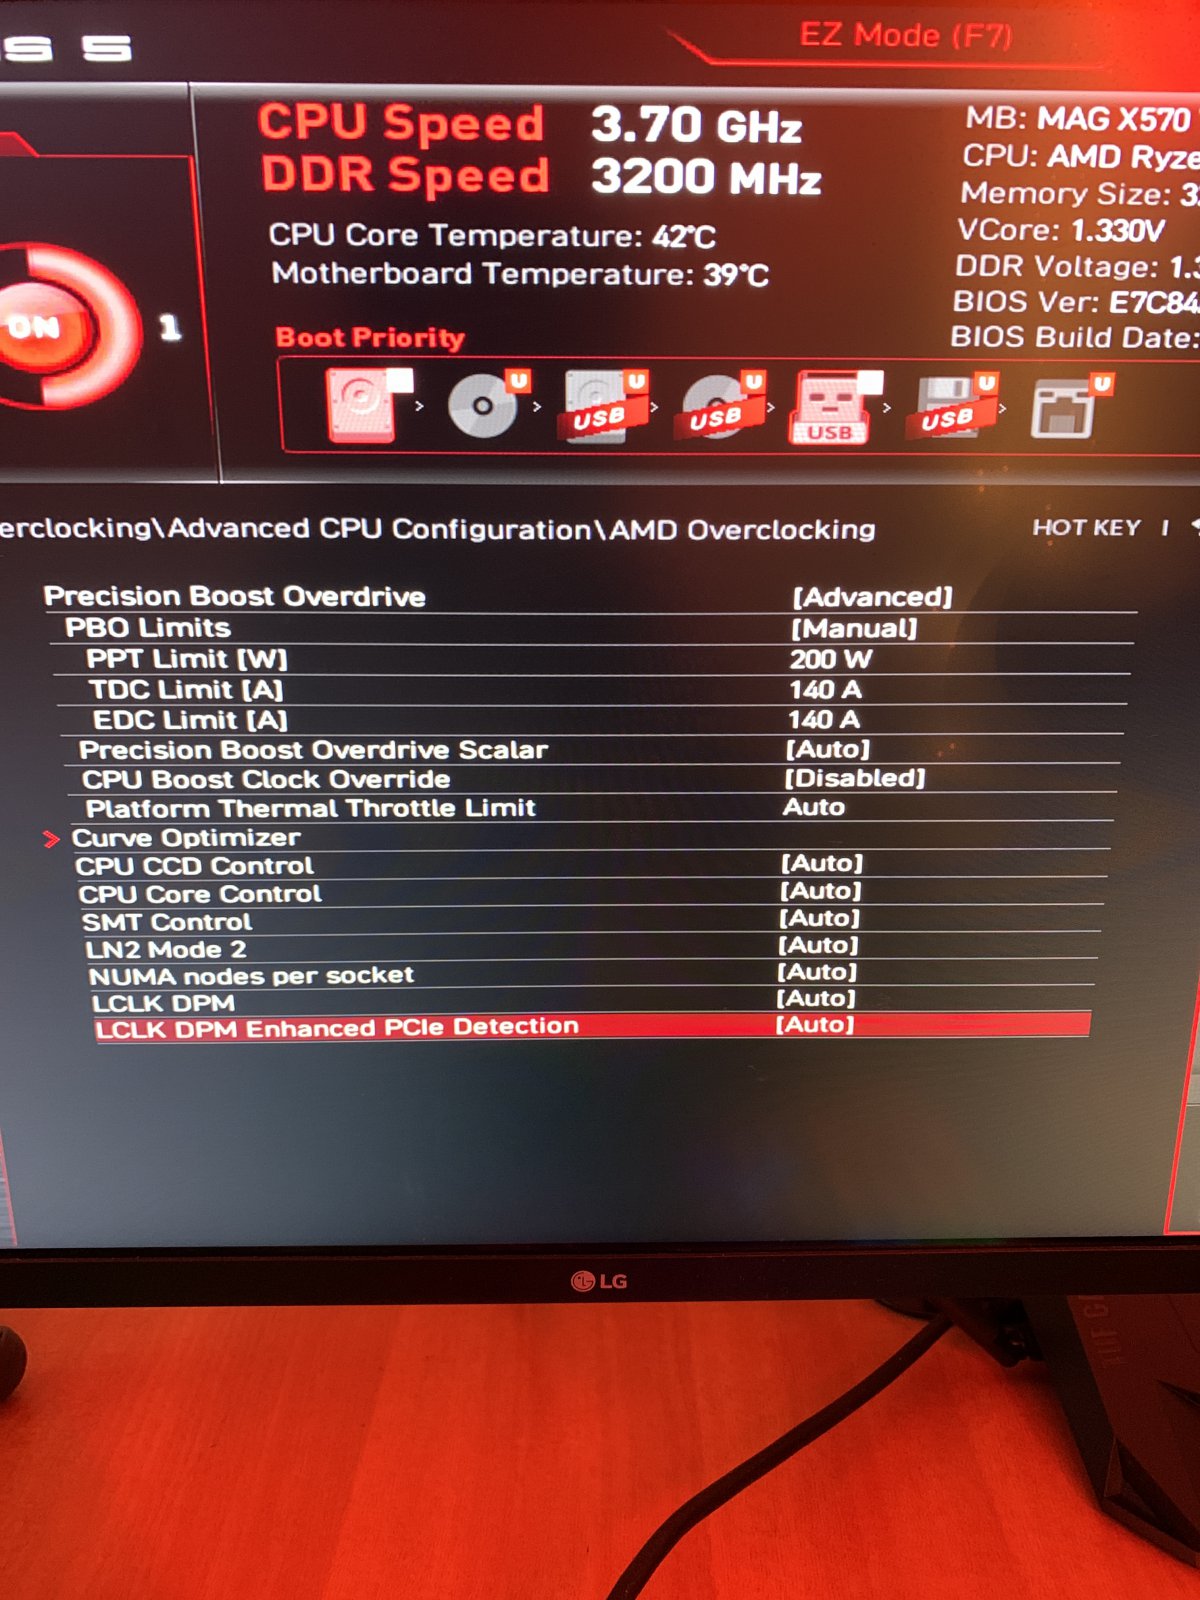 Overclock The AMD Ryzen 9 5900X to ALL CORE 4.6GHz with the MEG